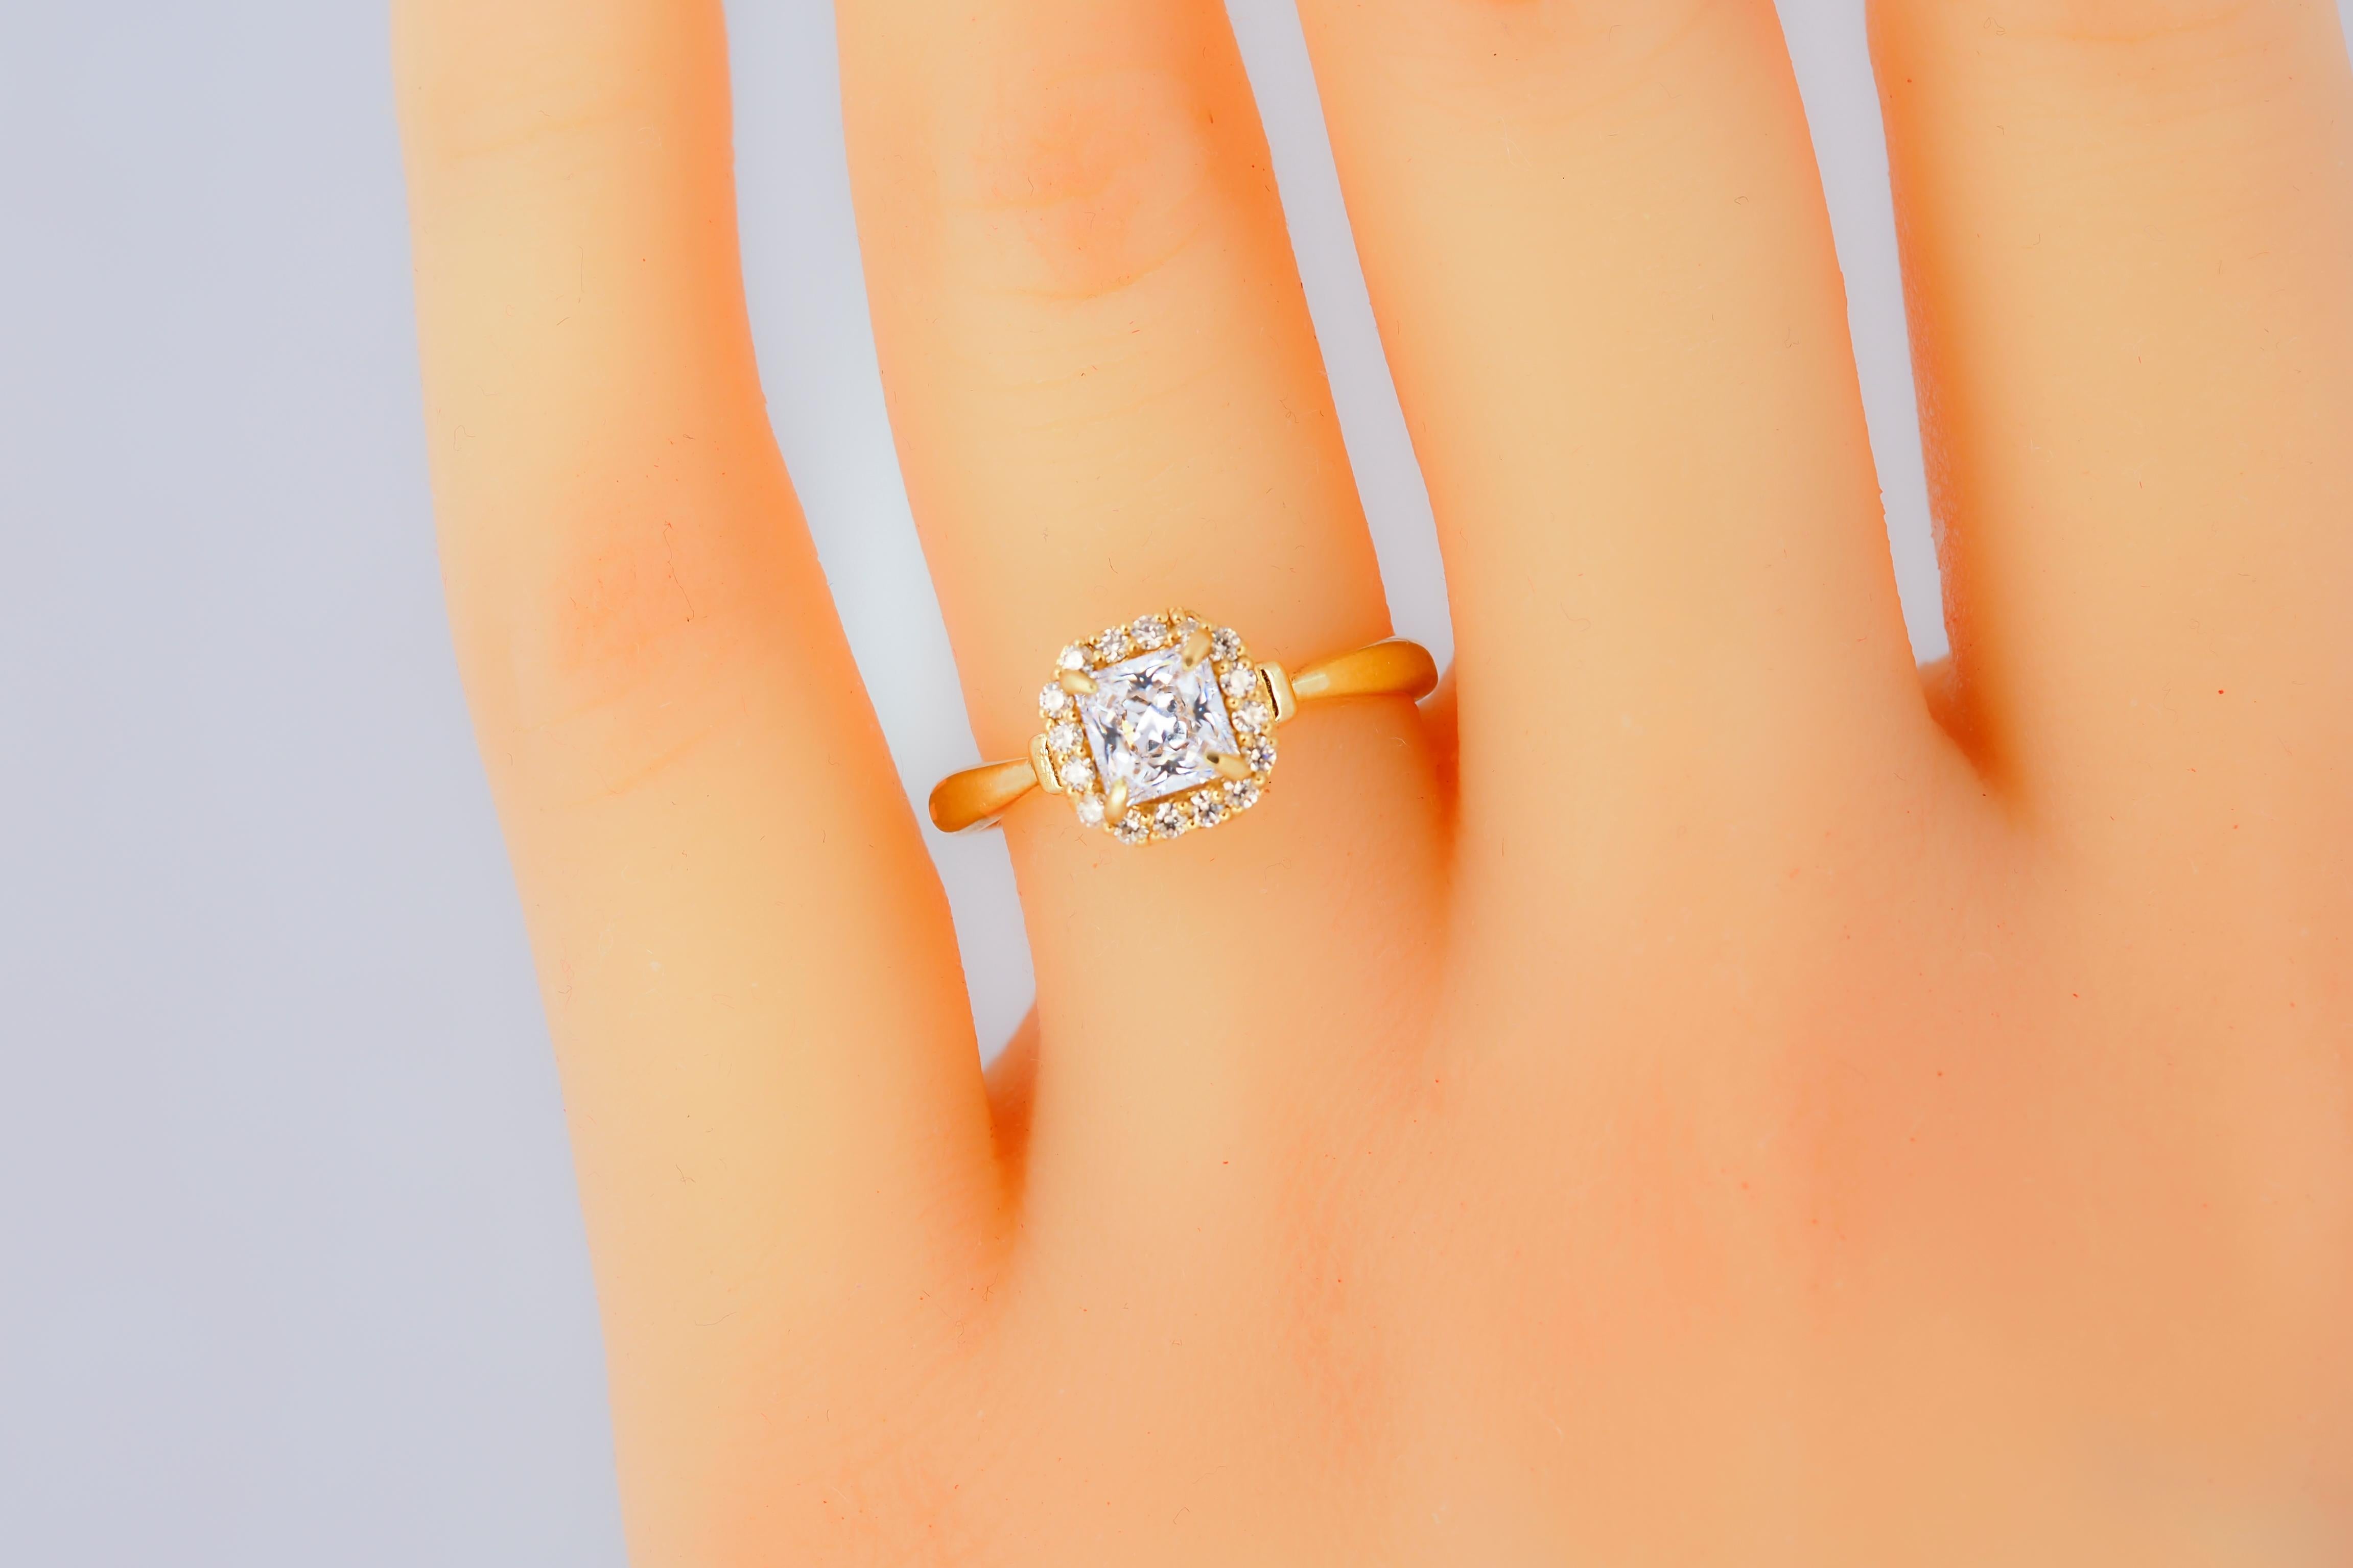 1 ct Princess cut moissanite 14k gold ring. Diamond like moissanite ring.  Princess cut moissanite engagement ring. Solitaire moissanite ring. 

Metal: 14k gold
Weight: 2 gr depends from size
Moissanite: weight 1 ct, D/ VS, princess cut
side